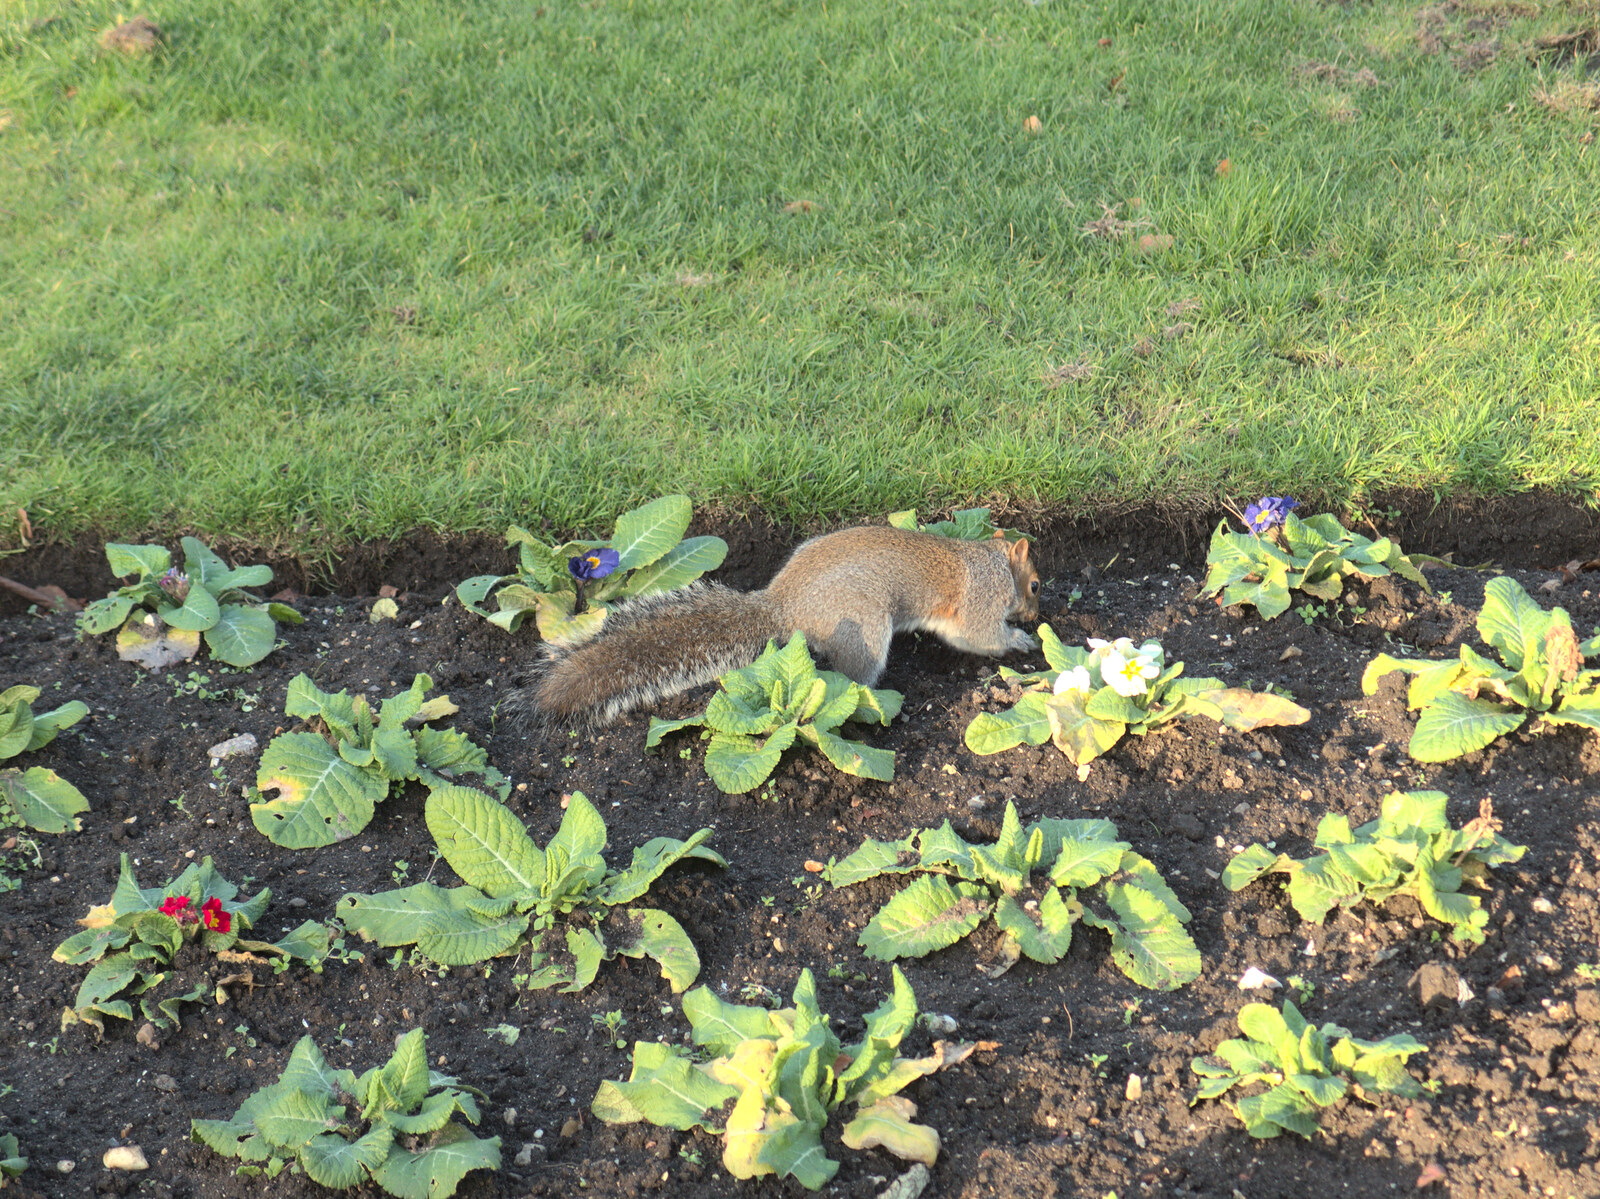 A squirrel rummages around the Primulas from A Trip to Abbey Gardens, Bury St. Edmunds, Suffolk - 20th December 2014